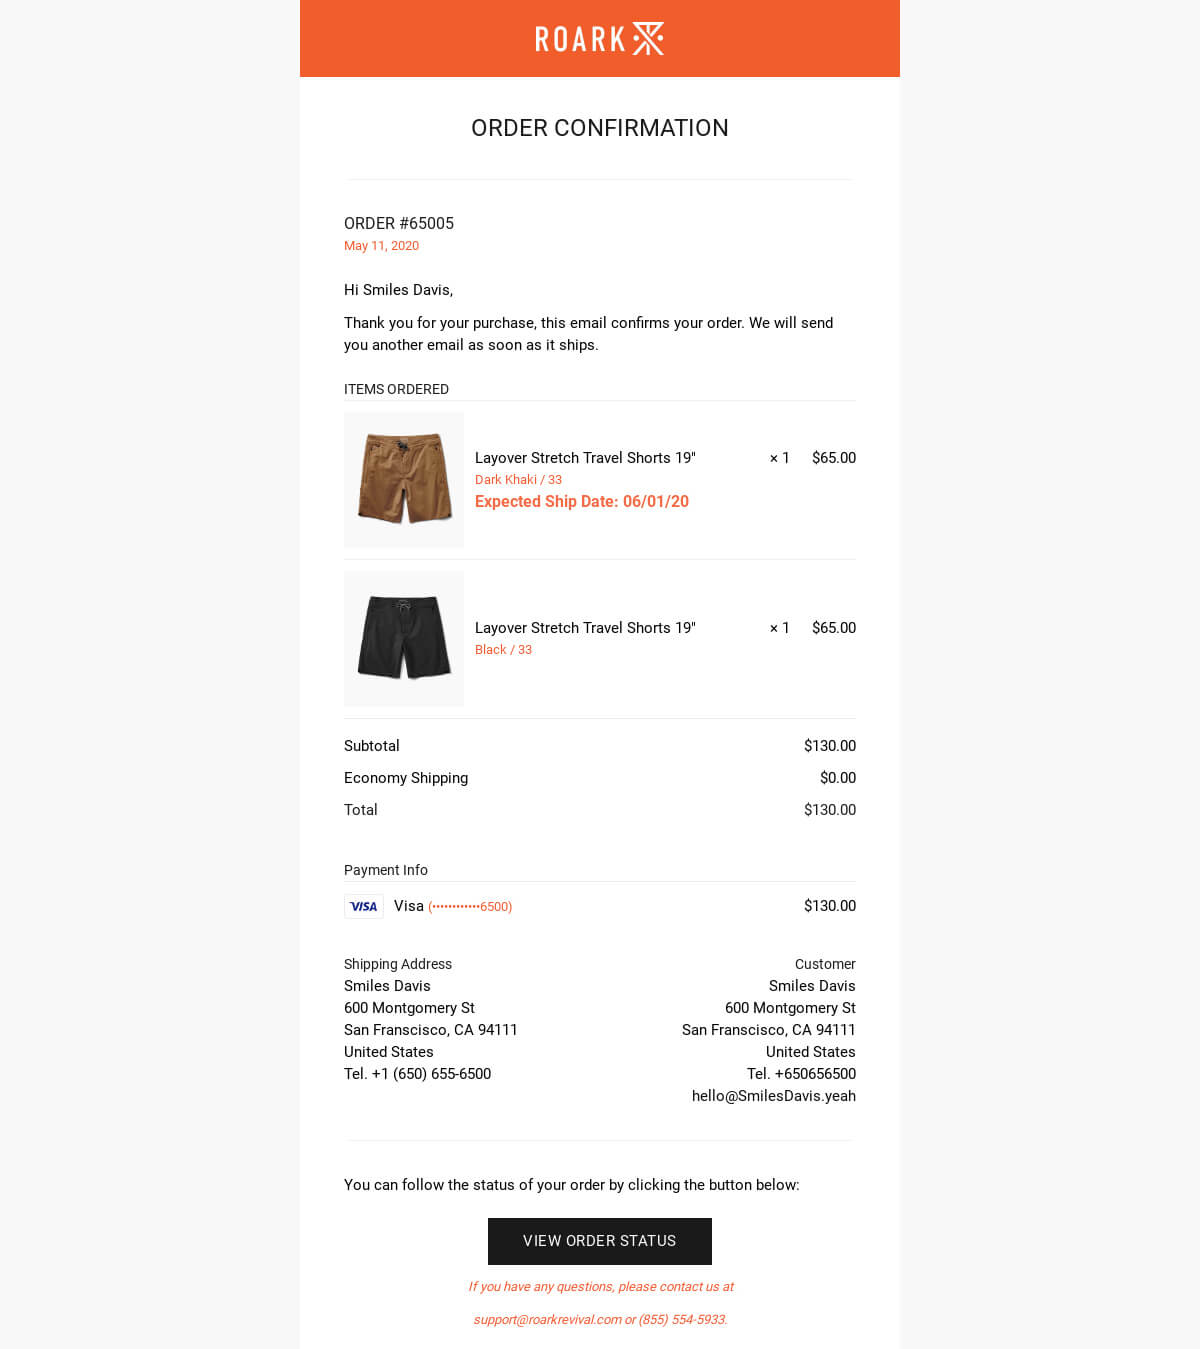 Order confirmation email by Roark